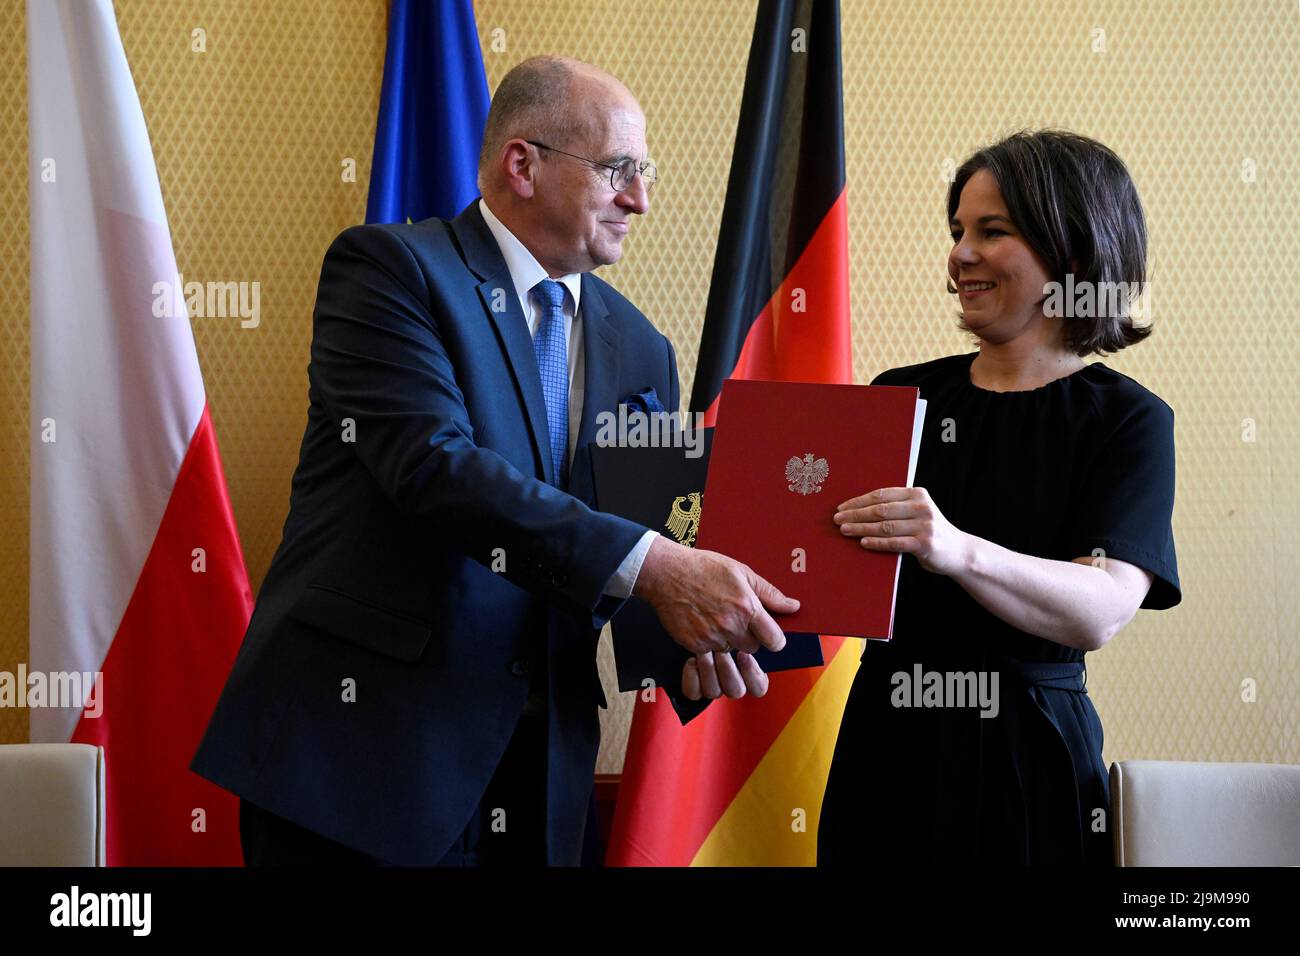 German Foreign Minister Annalena Baerbock and Polish Foreign Minister Zbigniew Rau exchange documents after signing a 'Memorandum of Understanding' for the permanent financing of the International Youth Meeting Centre (IYMC) of the Kreisau Foundation for European Understanding, at the Foreign Office in Berlin, Germany May 24, 2022. Tobias Schwarz/Pool via REUTERS Stock Photo